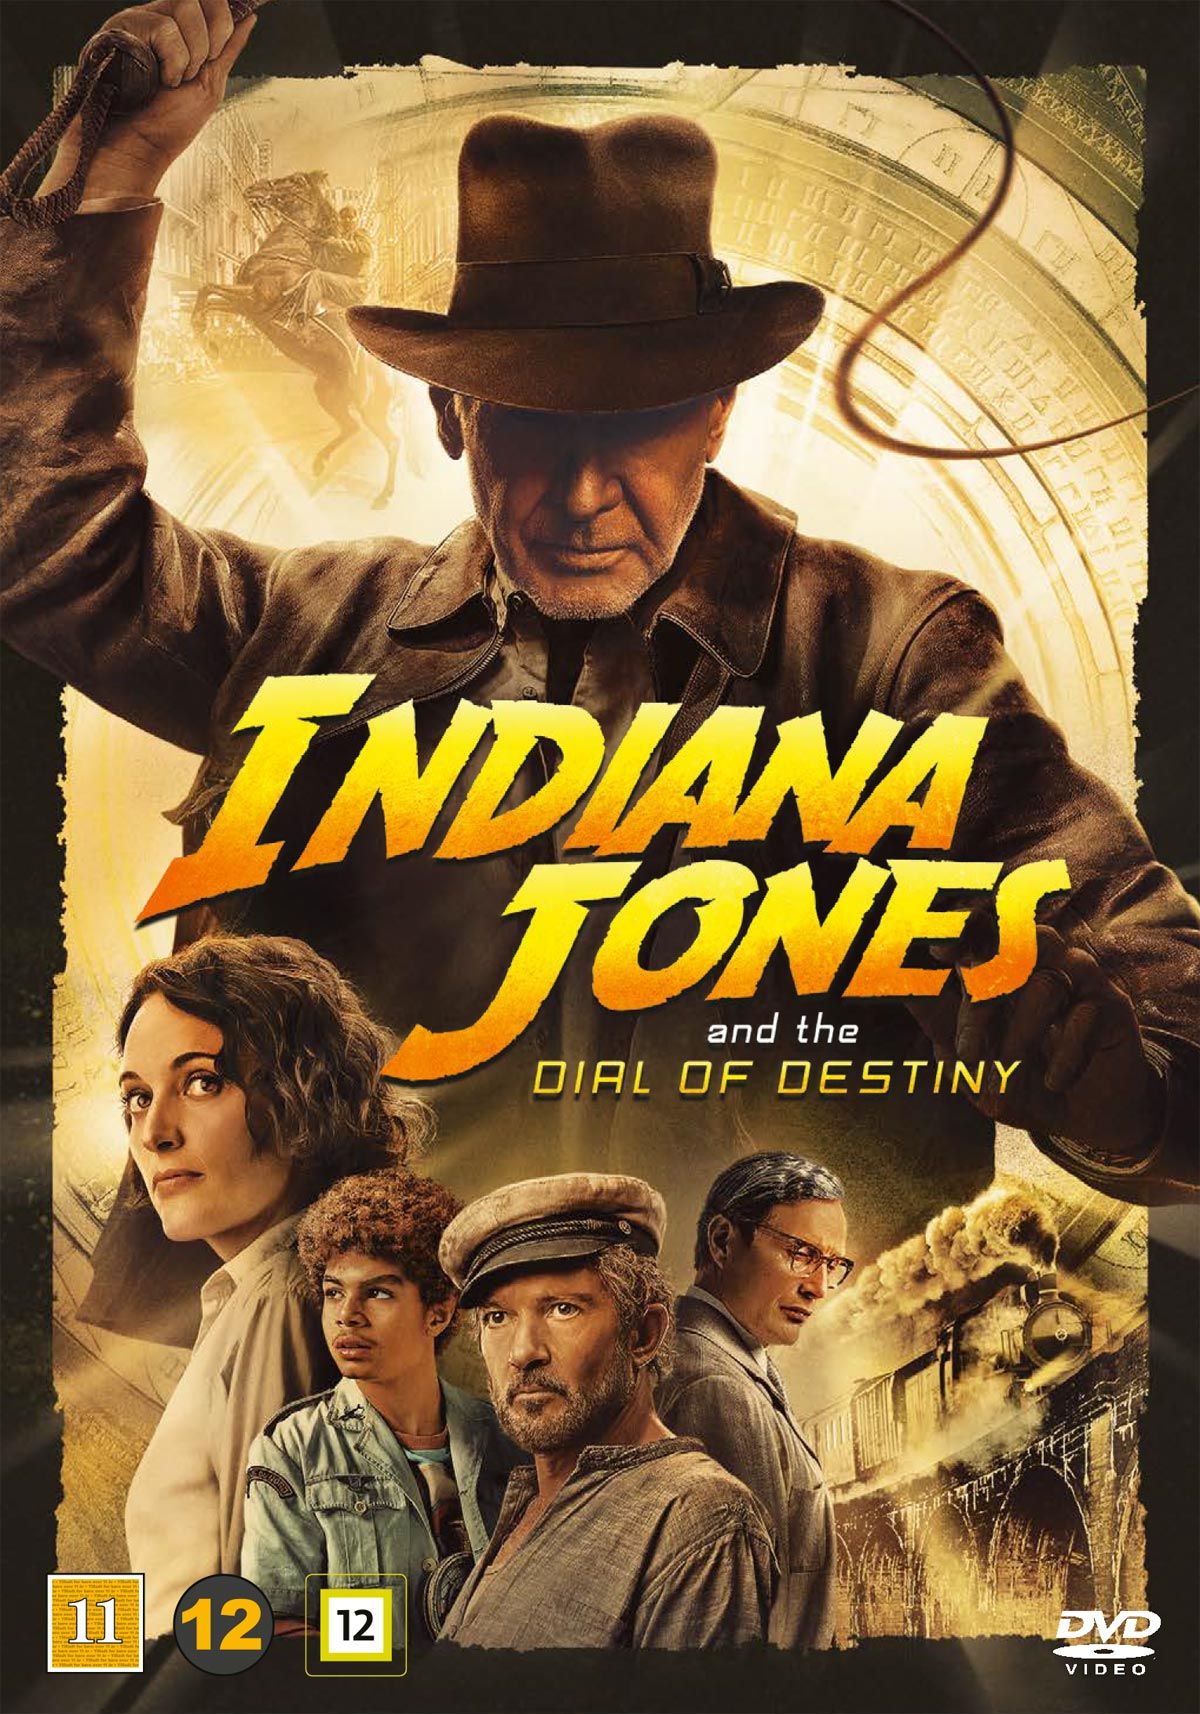 Movie in the Park - "Indiana Jones and the Dial of Destiny"